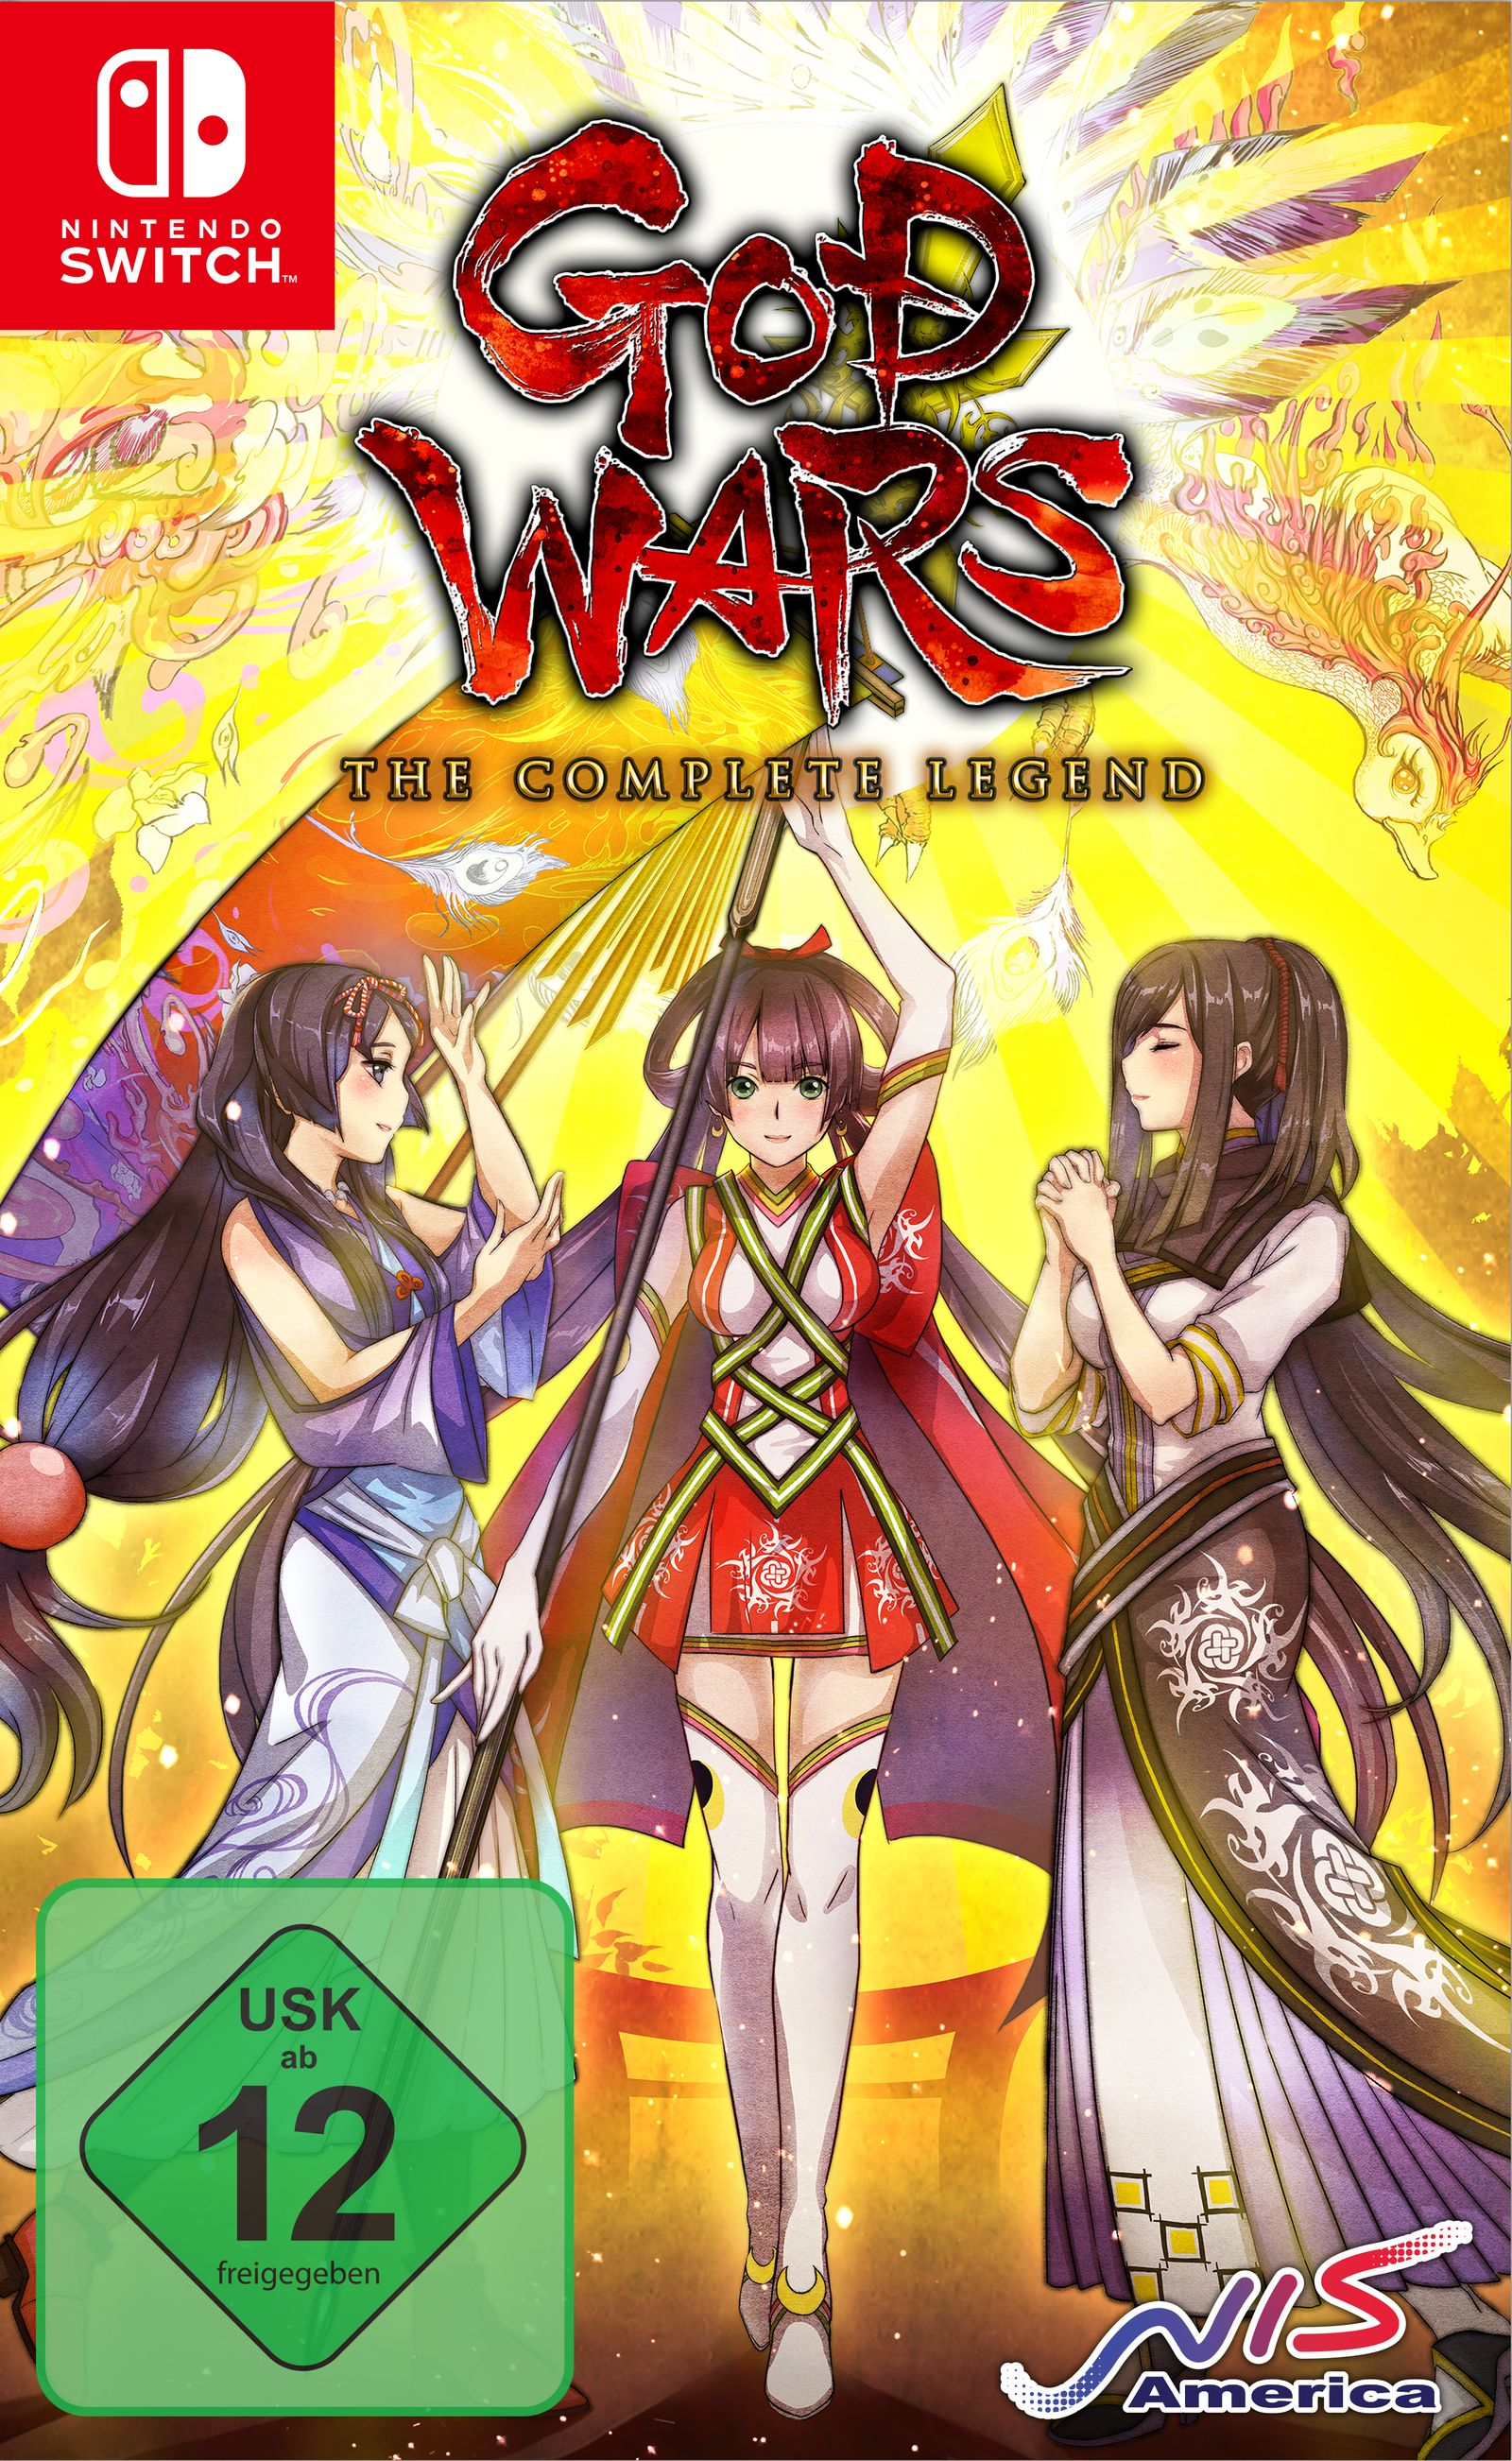 The [Nintendo WARS Switch] - Complete (Switch) Legend GOD